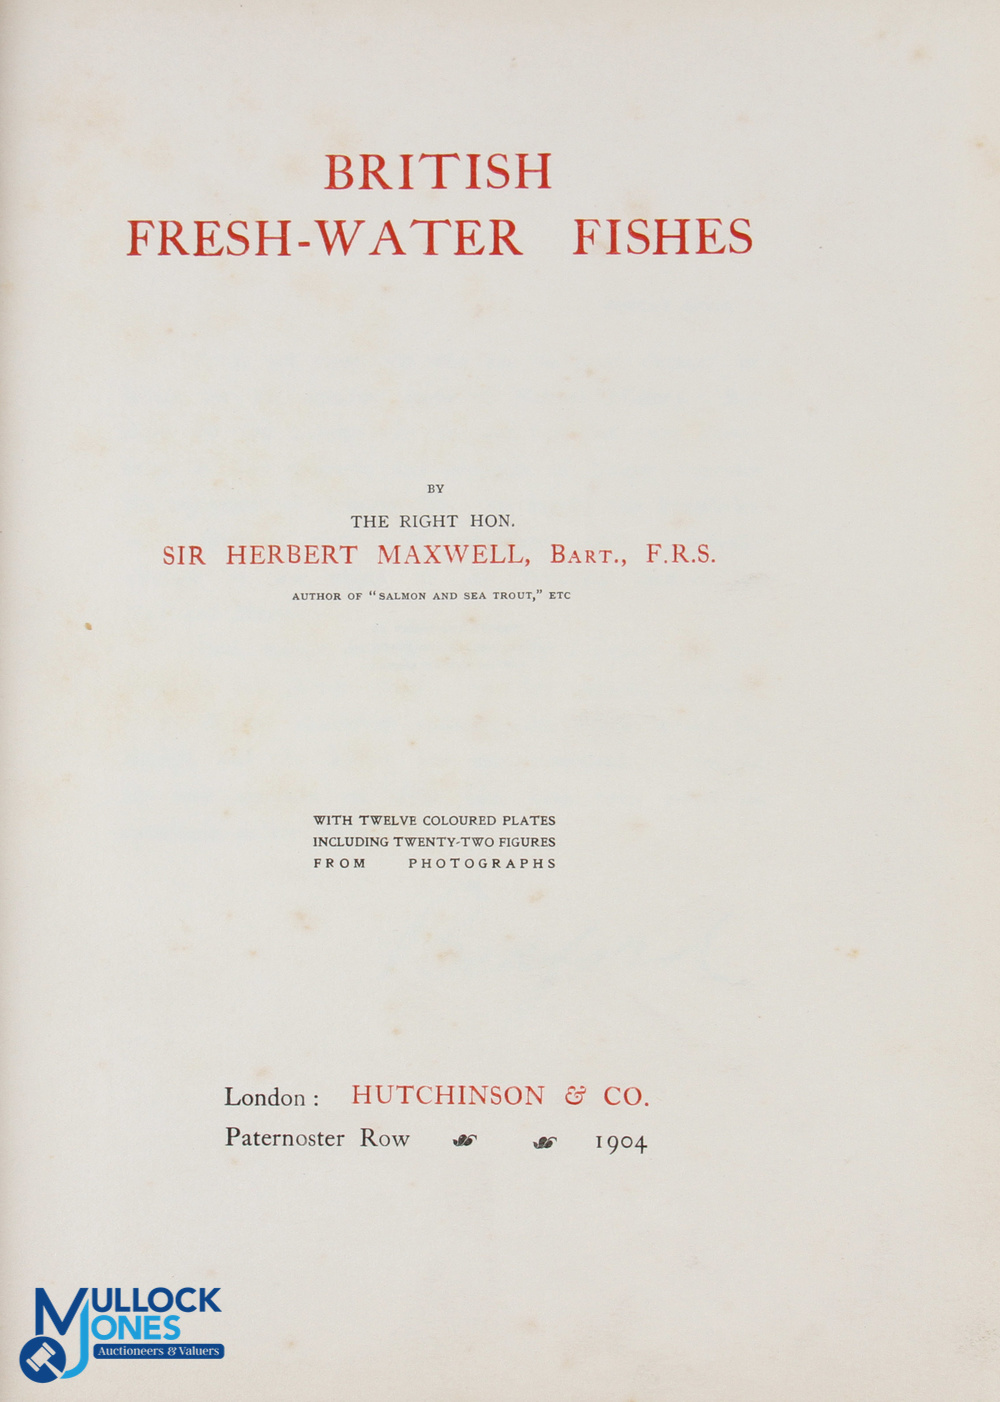 1904 British Fresh-Water Fishes Maxwell, Sir Herbert, published by Hutchinson & Co, London, 1904 - Image 2 of 2